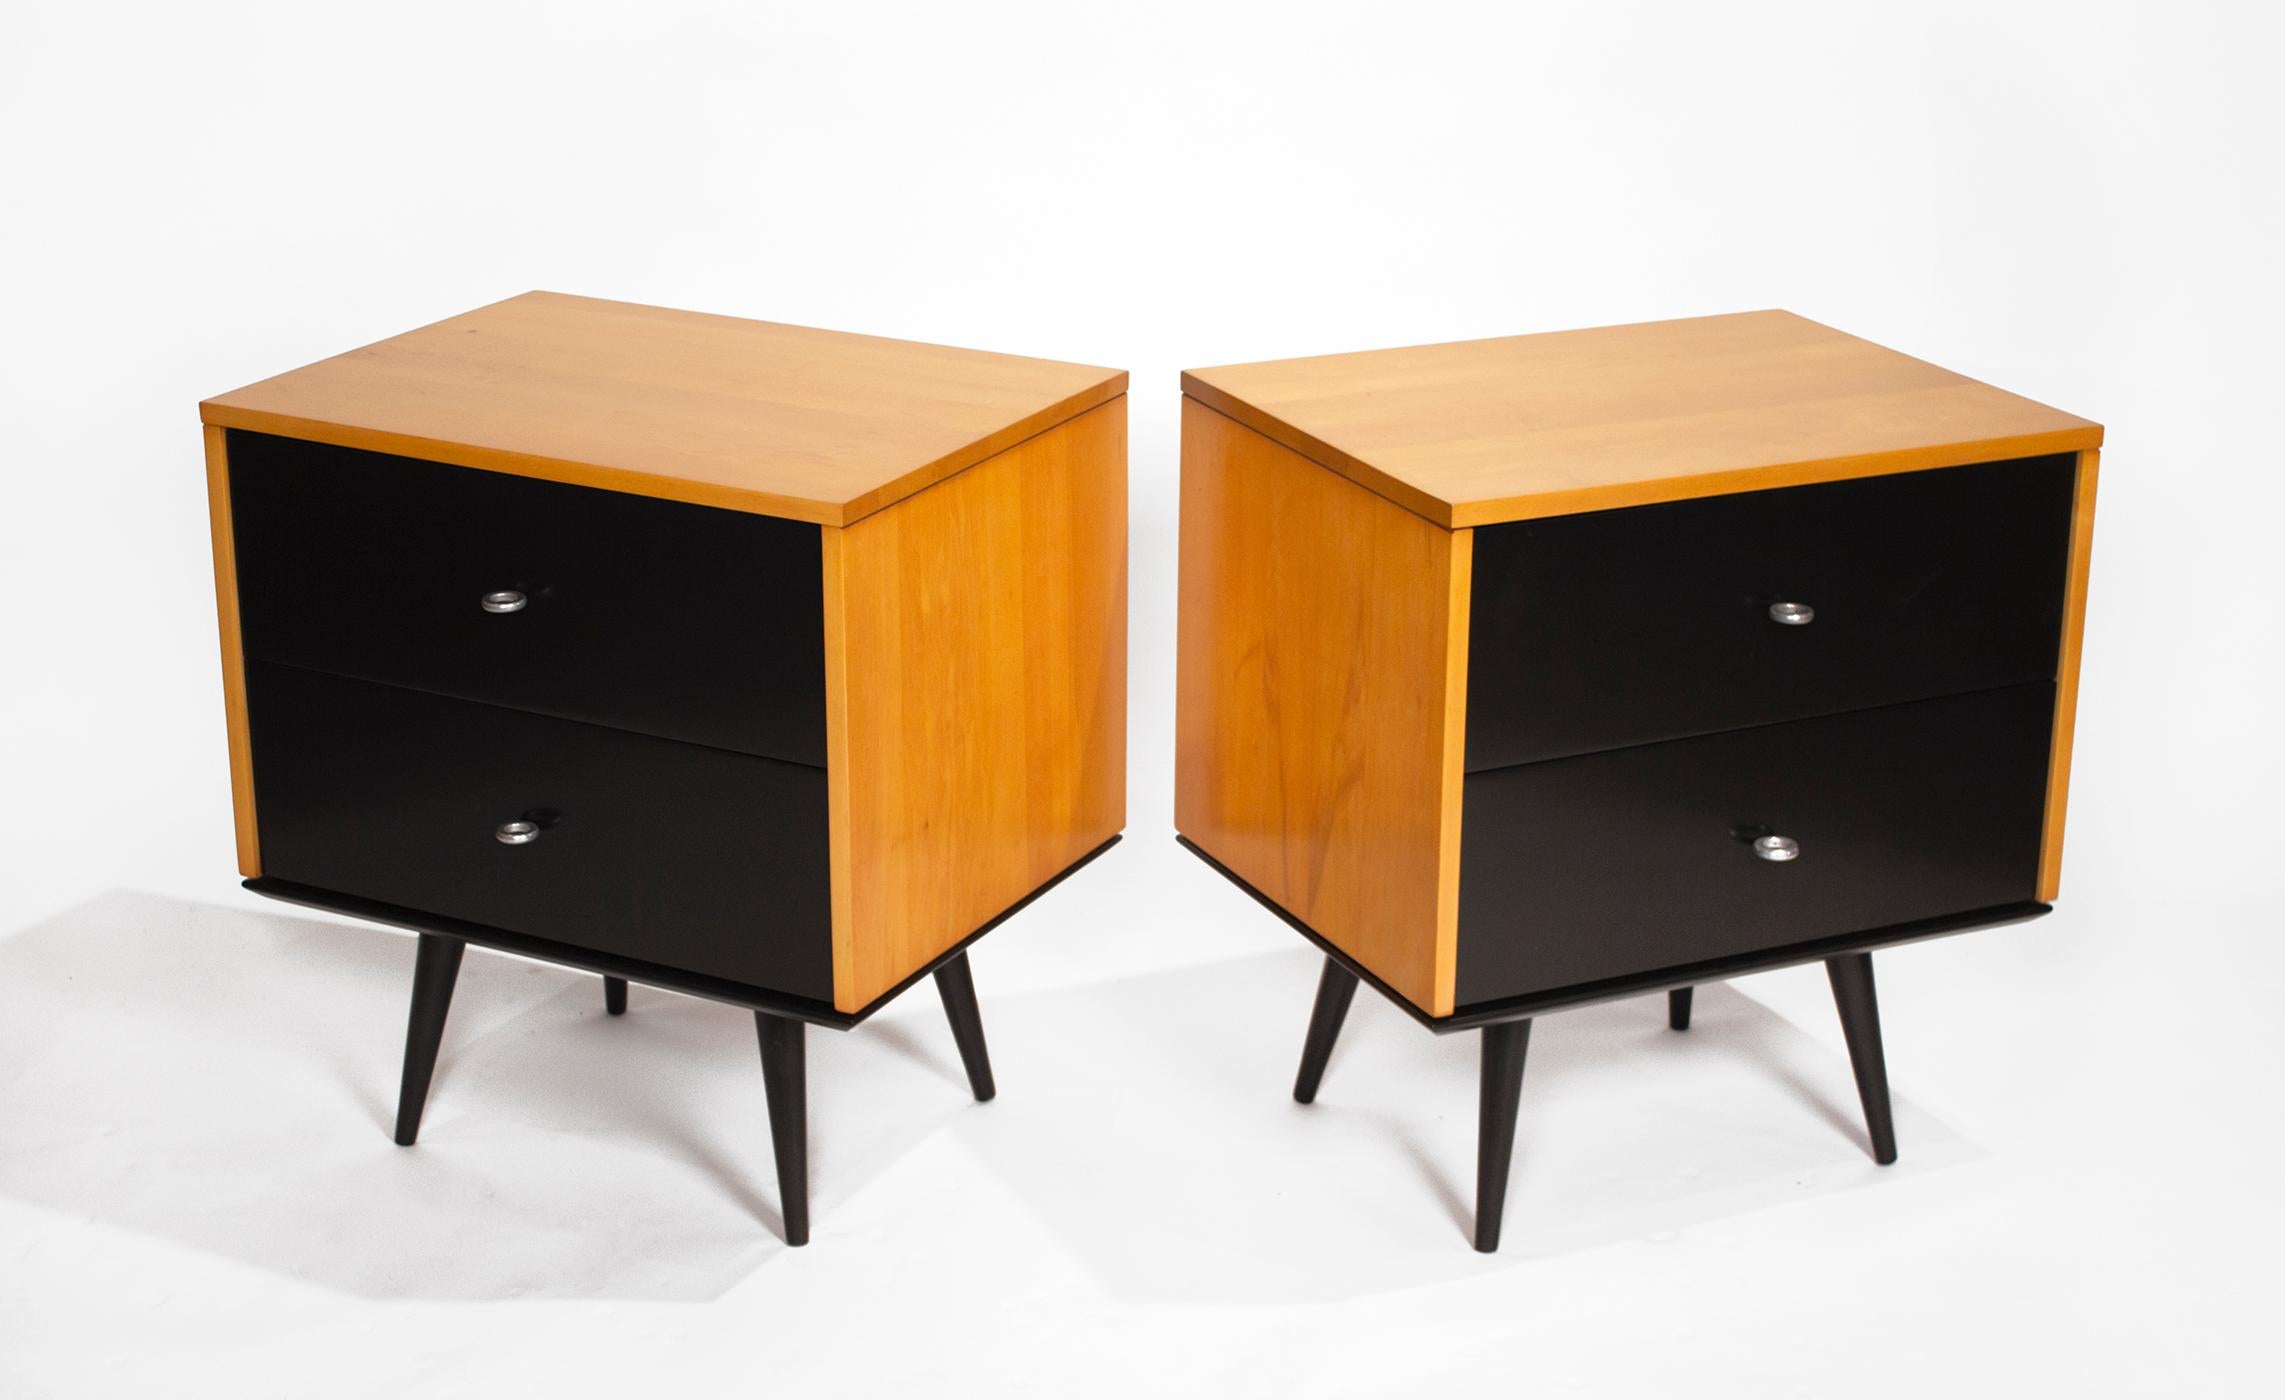 Stunning pair of solid maple Paul McCobb nightstands with original hardware. These cabinets are rock solid and were freshly refinished in a period-appropriate amber lacquer. Ultra-modern and indestructible.